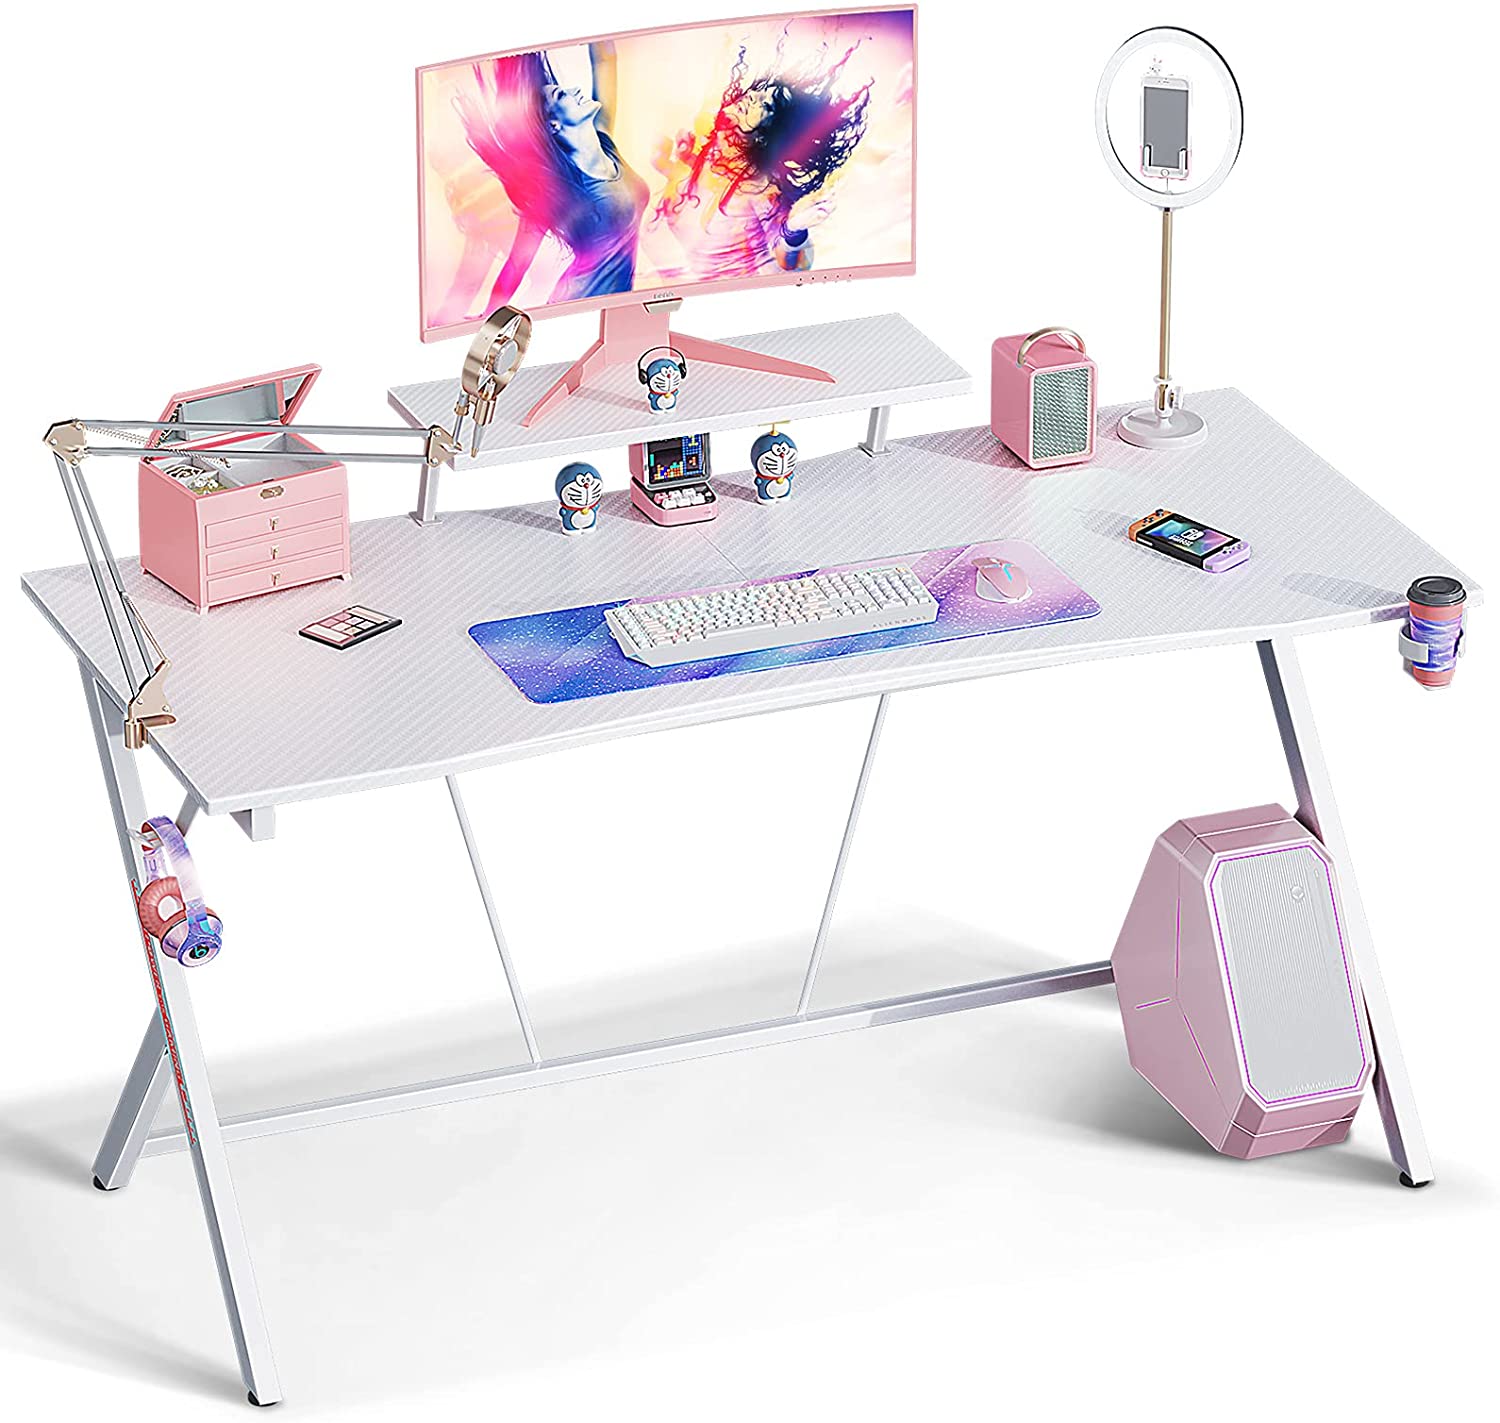 60" Gaming Desk with Monitor Shelf-White